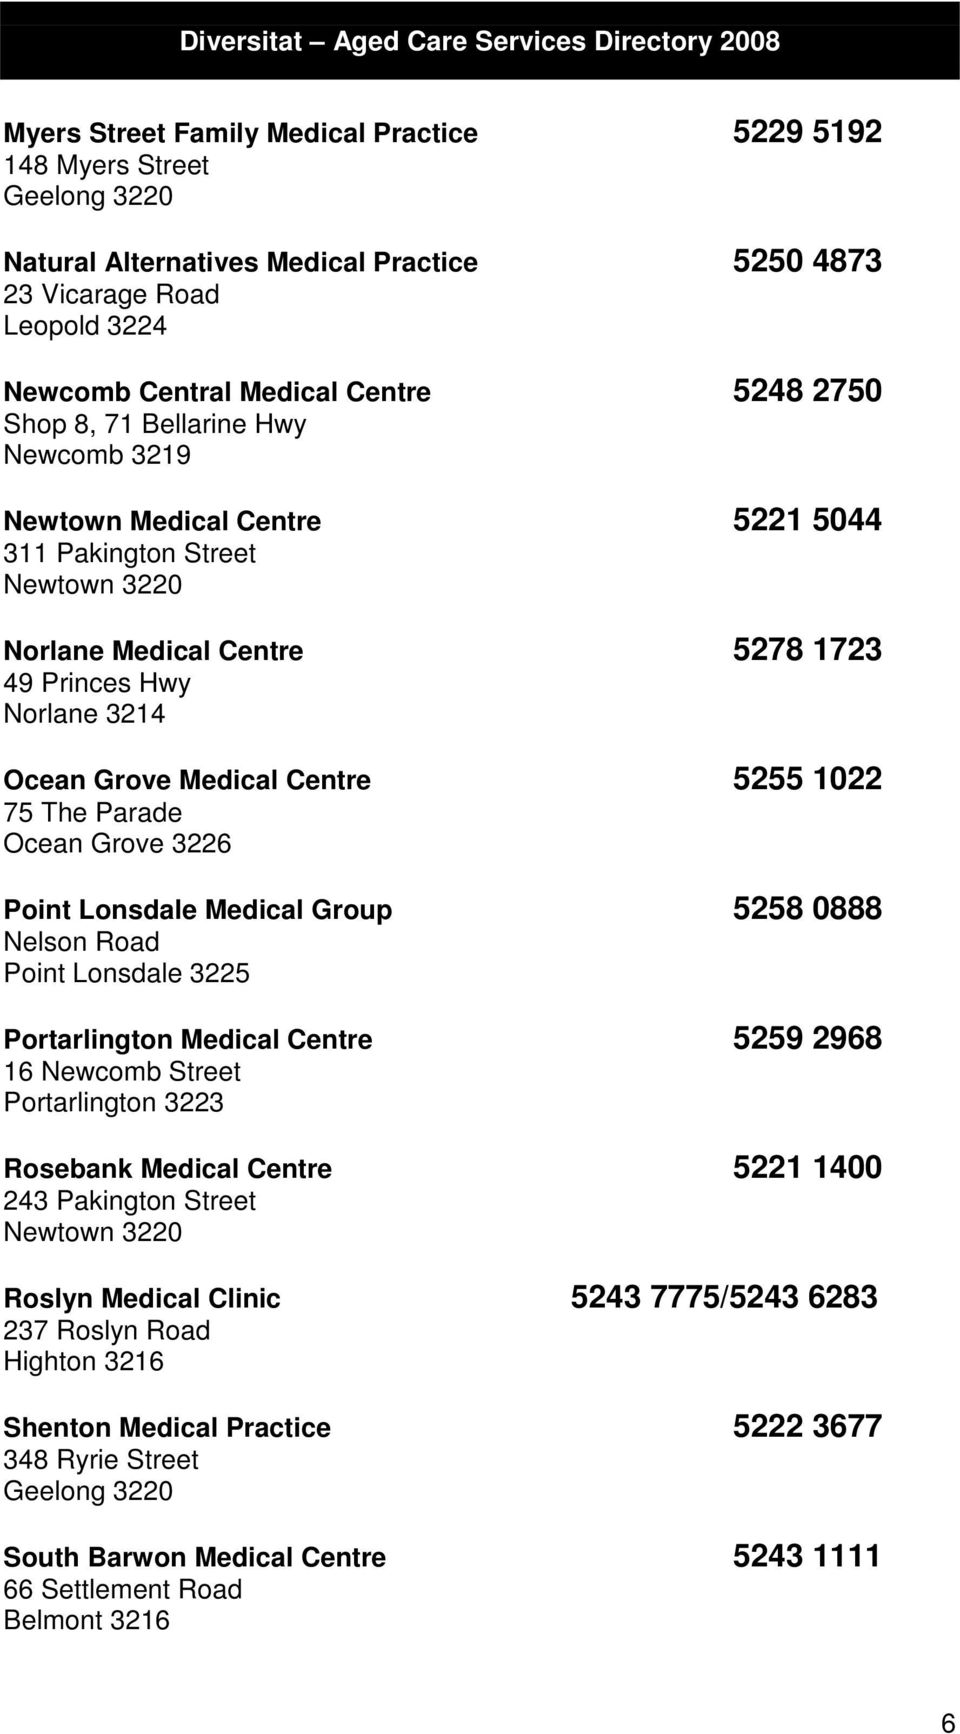 1022 75 The Parade Ocean Grove 3226 Point Lonsdale Medical Group 5258 0888 Nelson Road Point Lonsdale 3225 Portarlington Medical Centre 5259 2968 16 Newcomb Street Portarlington 3223 Rosebank Medical